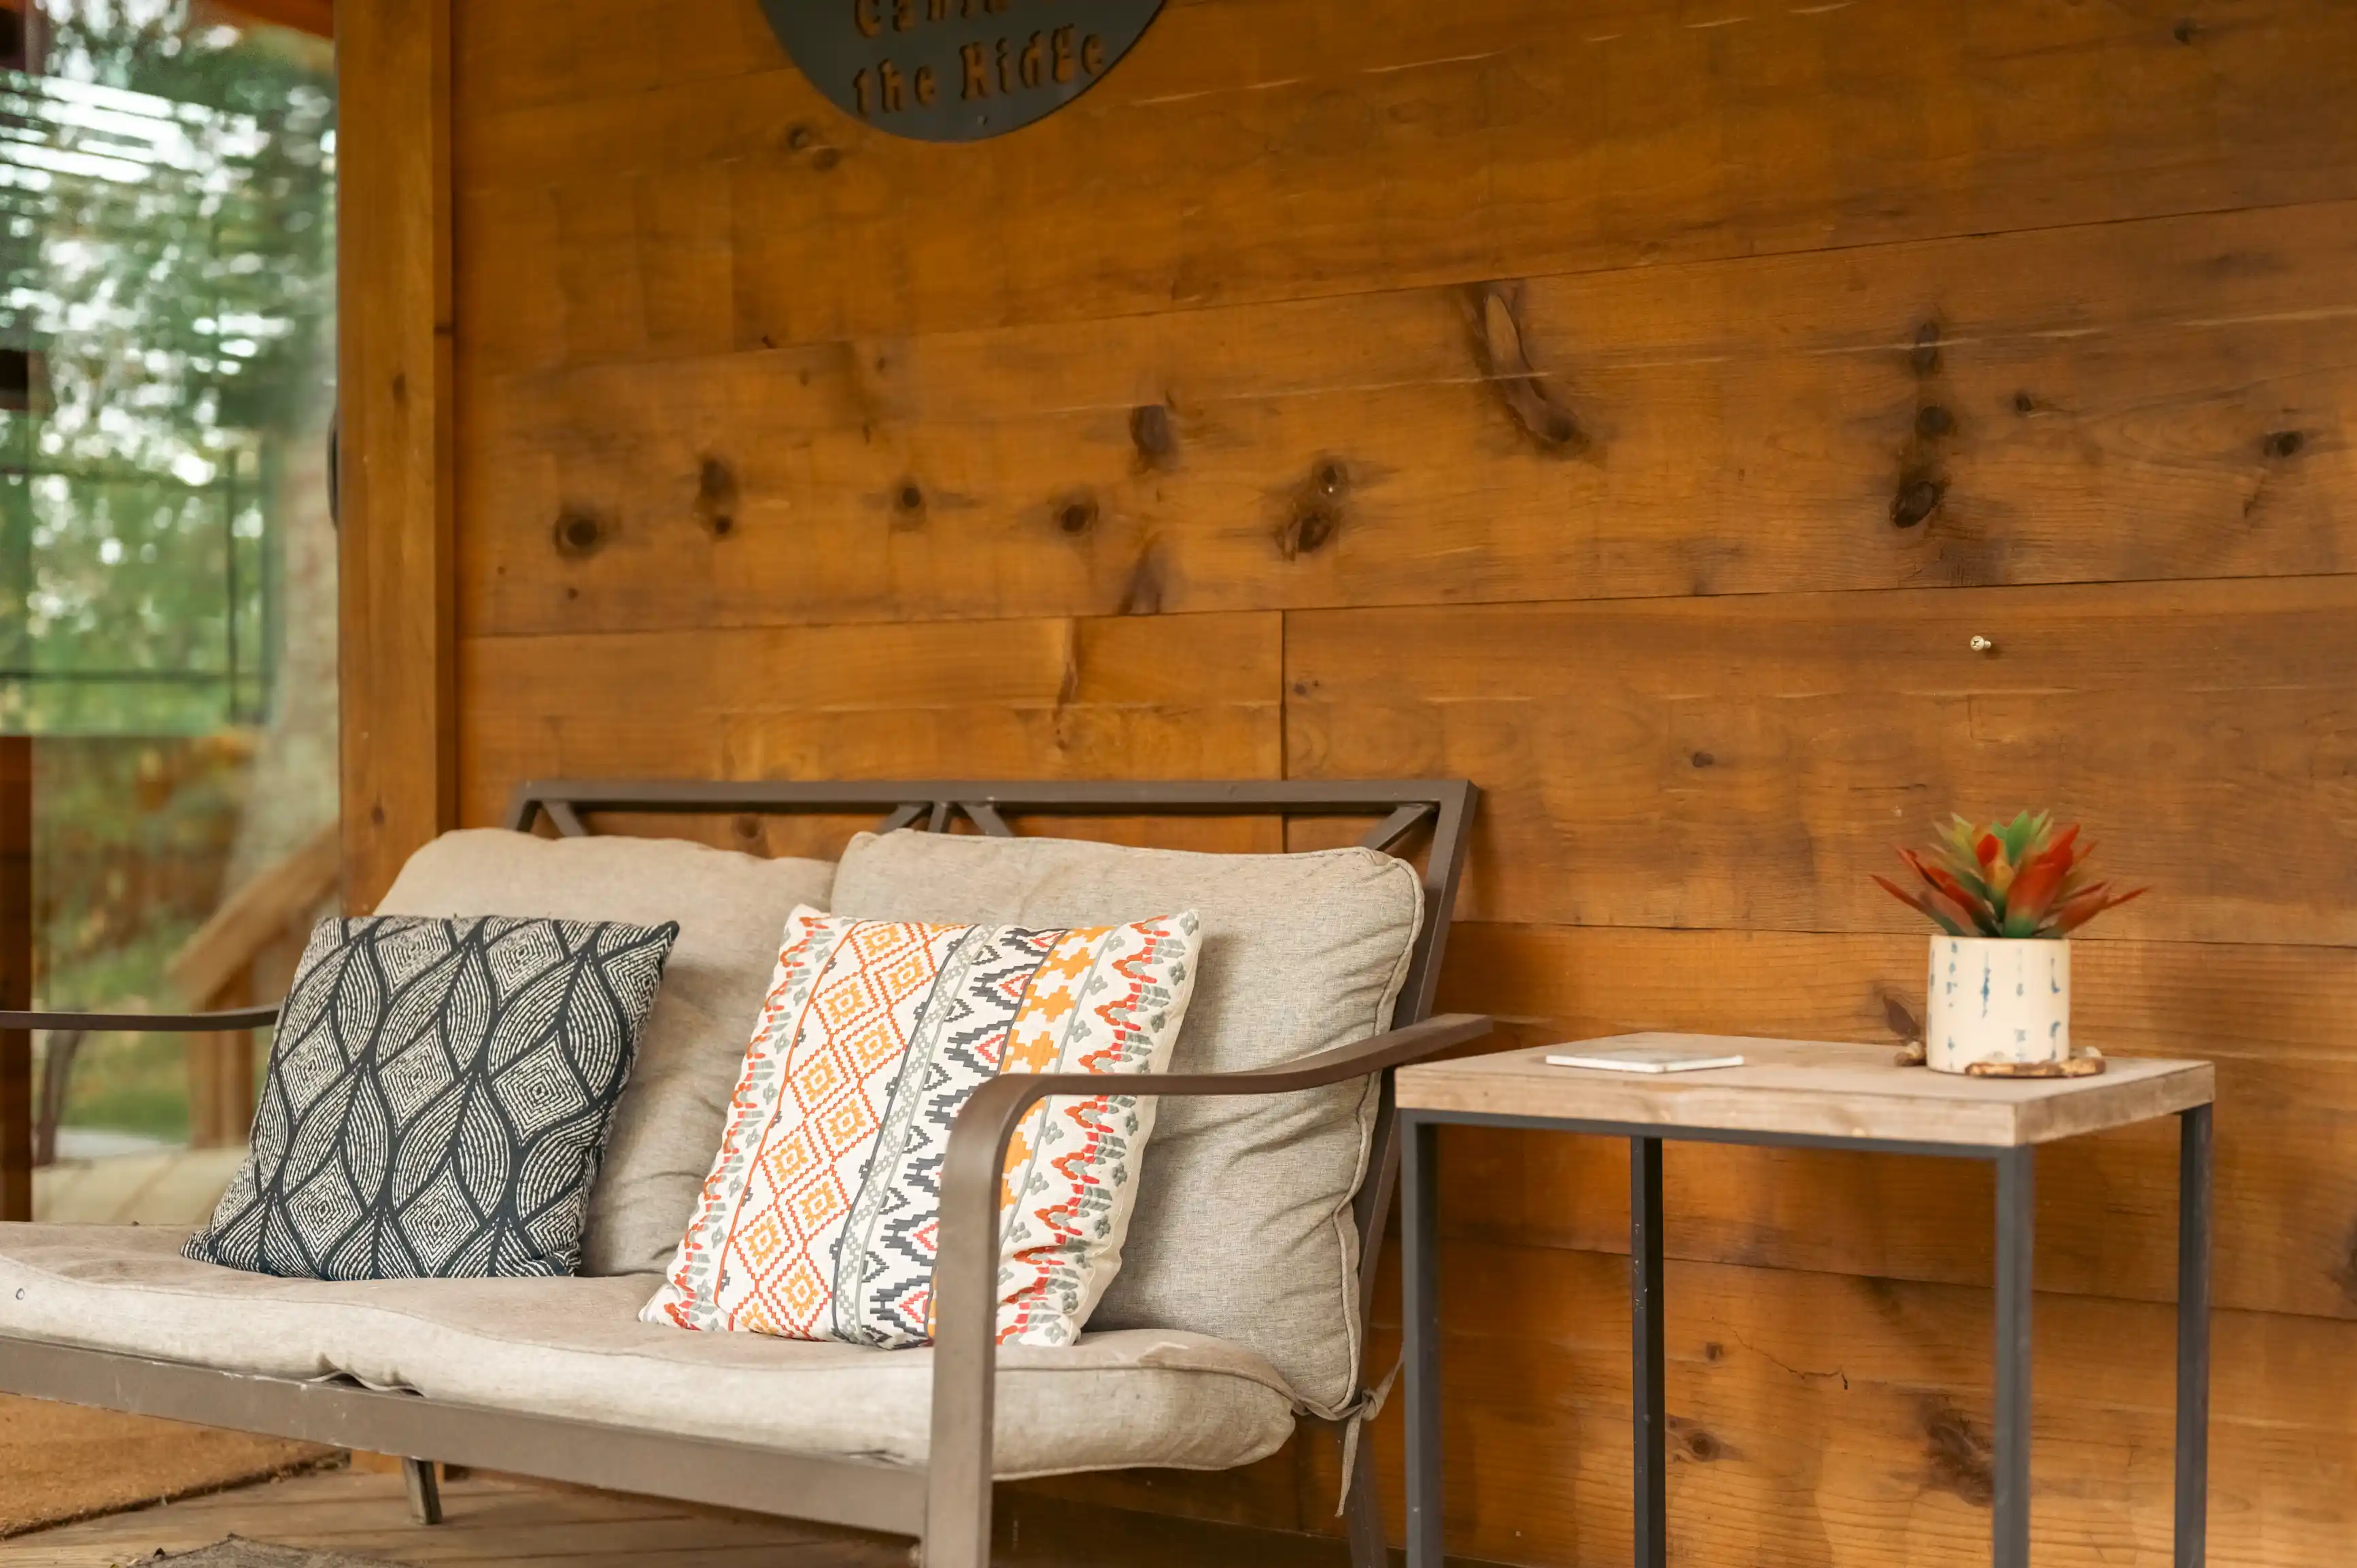 Cozy outdoor seating area with a modern sofa adorned with patterned pillows next to a wooden side table featuring a potted succulent plant, against a warm wooden cabin wall.